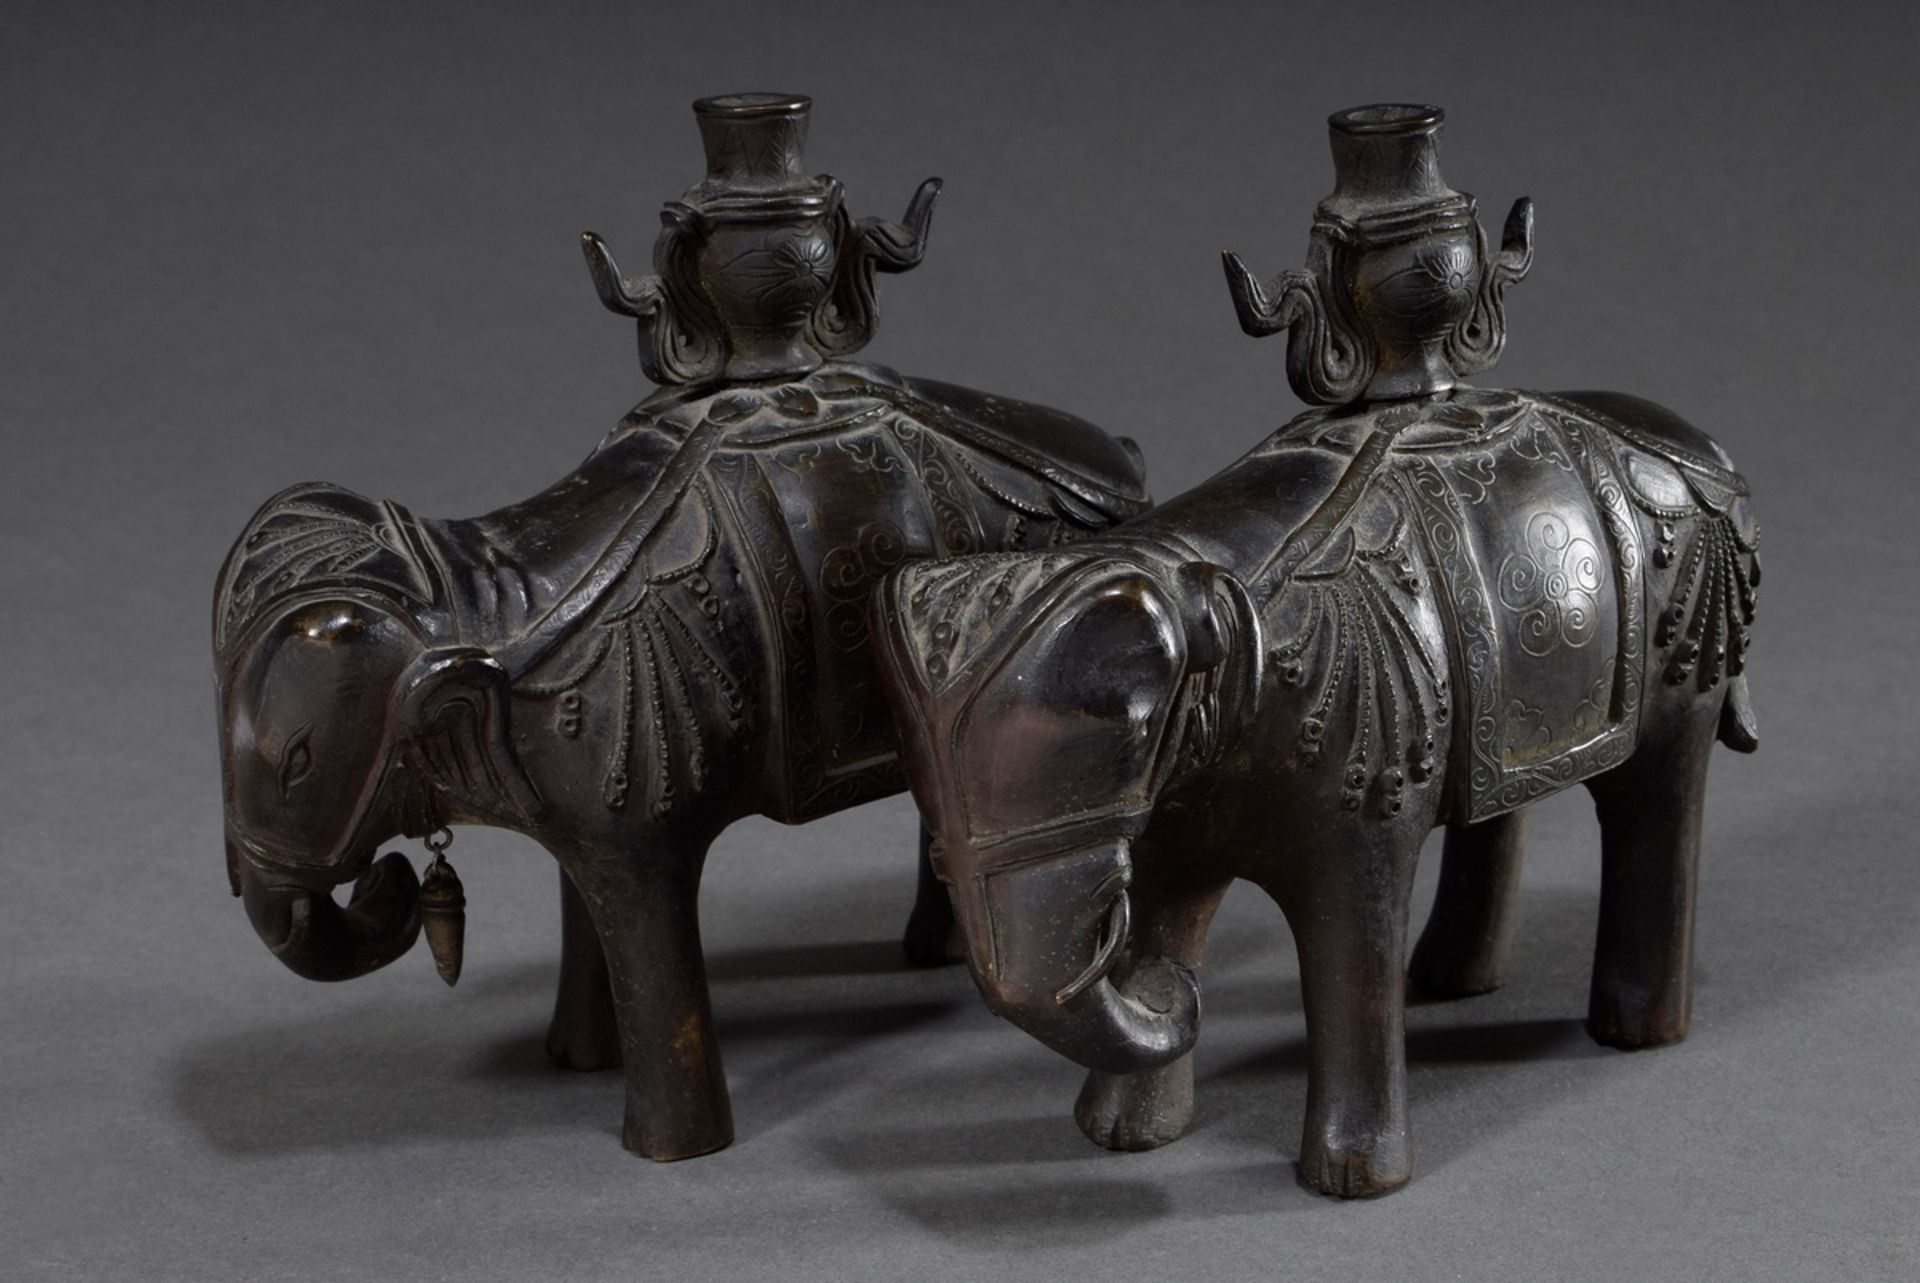 Pair of Chinese bronze elephants with vases on their backs, formerly candlesticks of an altar set o